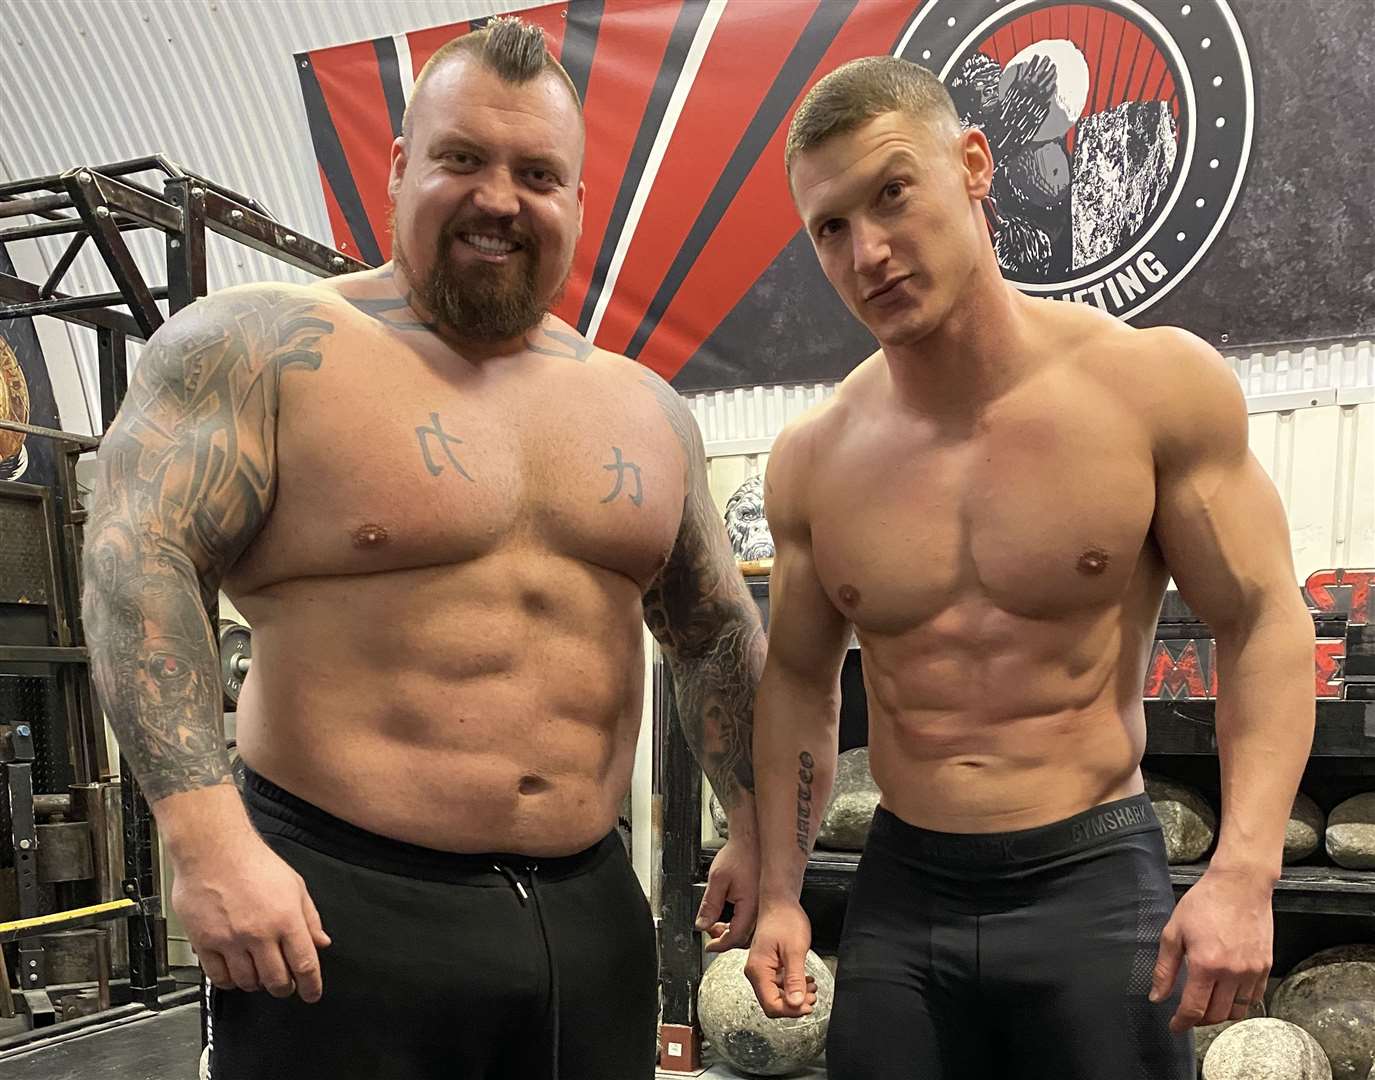 World's Strongest Man winner Eddie Hall is one of Matt's fans and asked to do a video with him